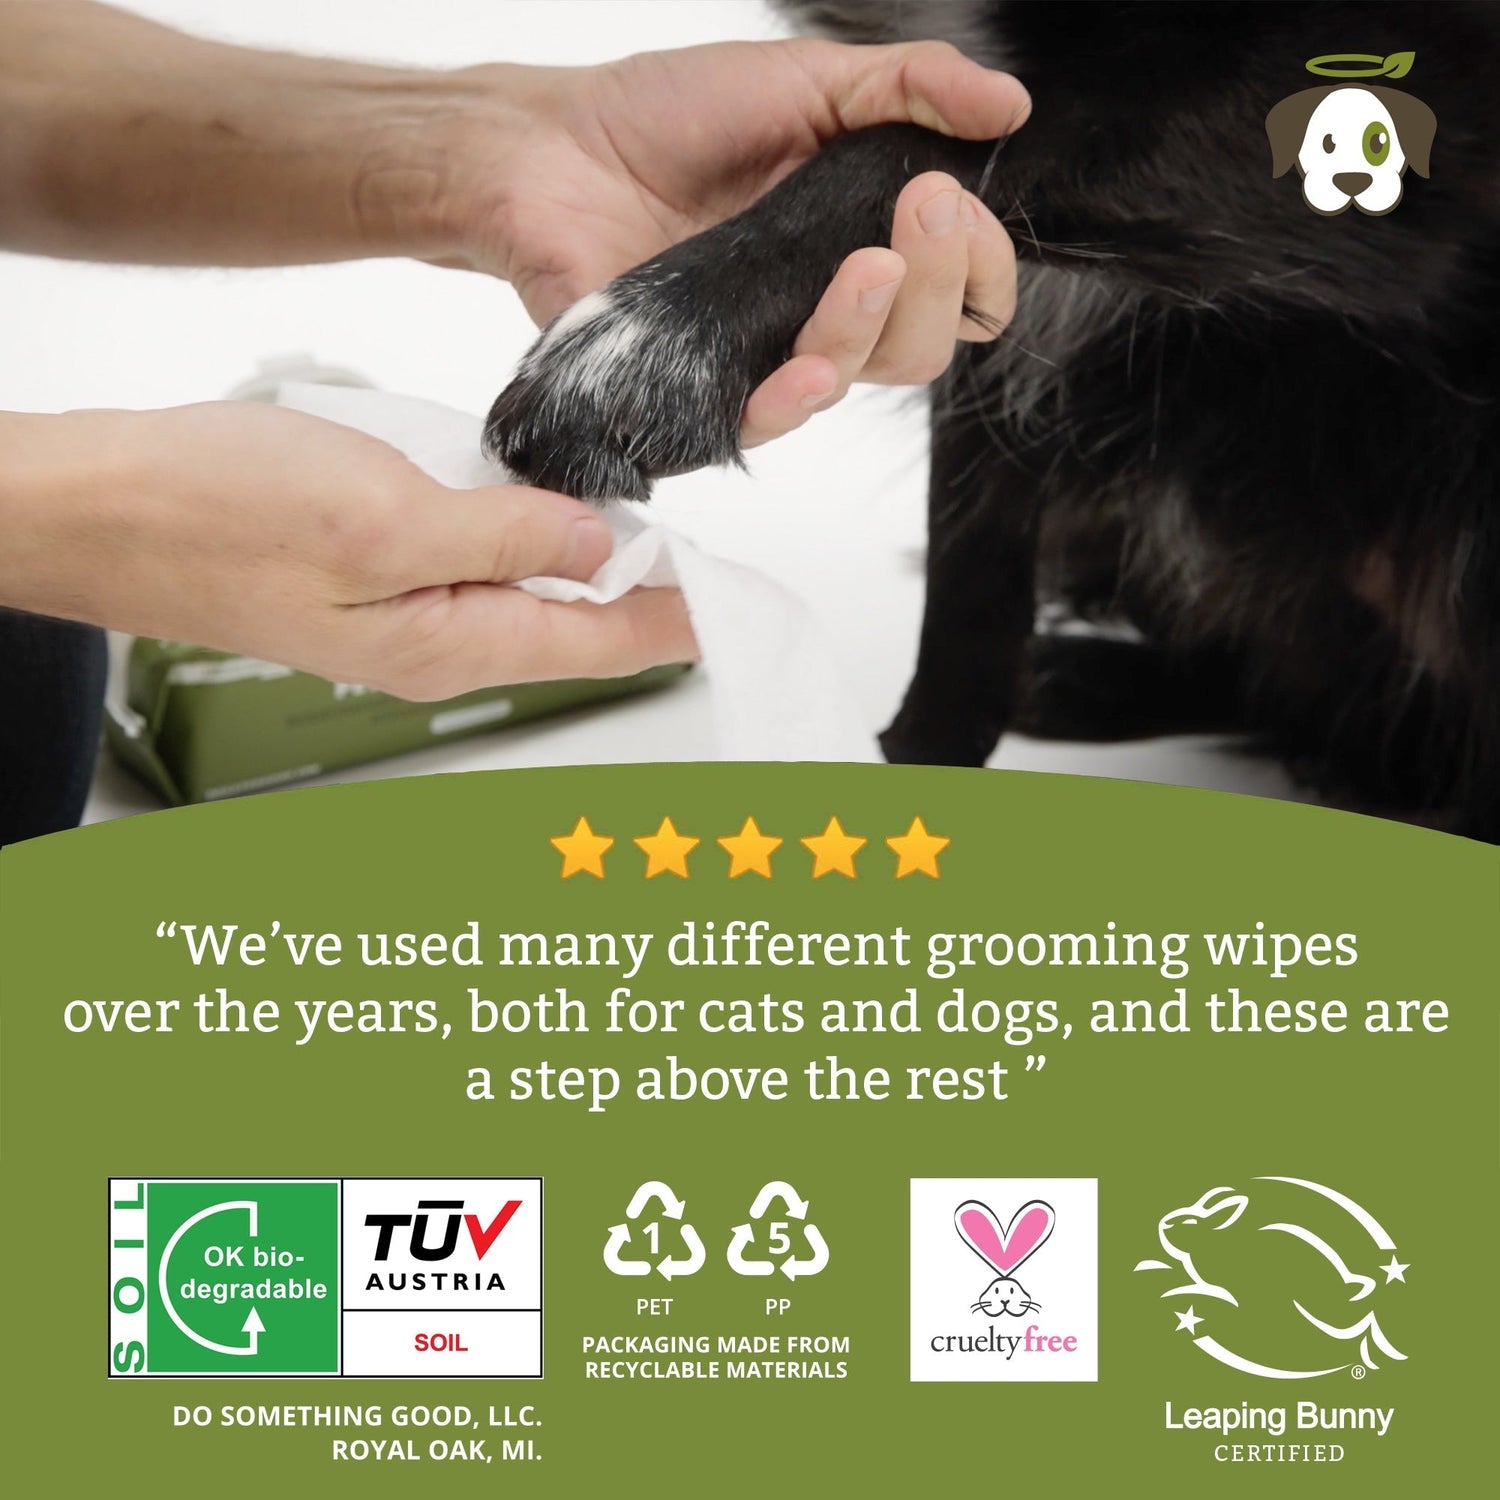 Biodegradable Grooming Wipes - Natural Scent (60 Count)